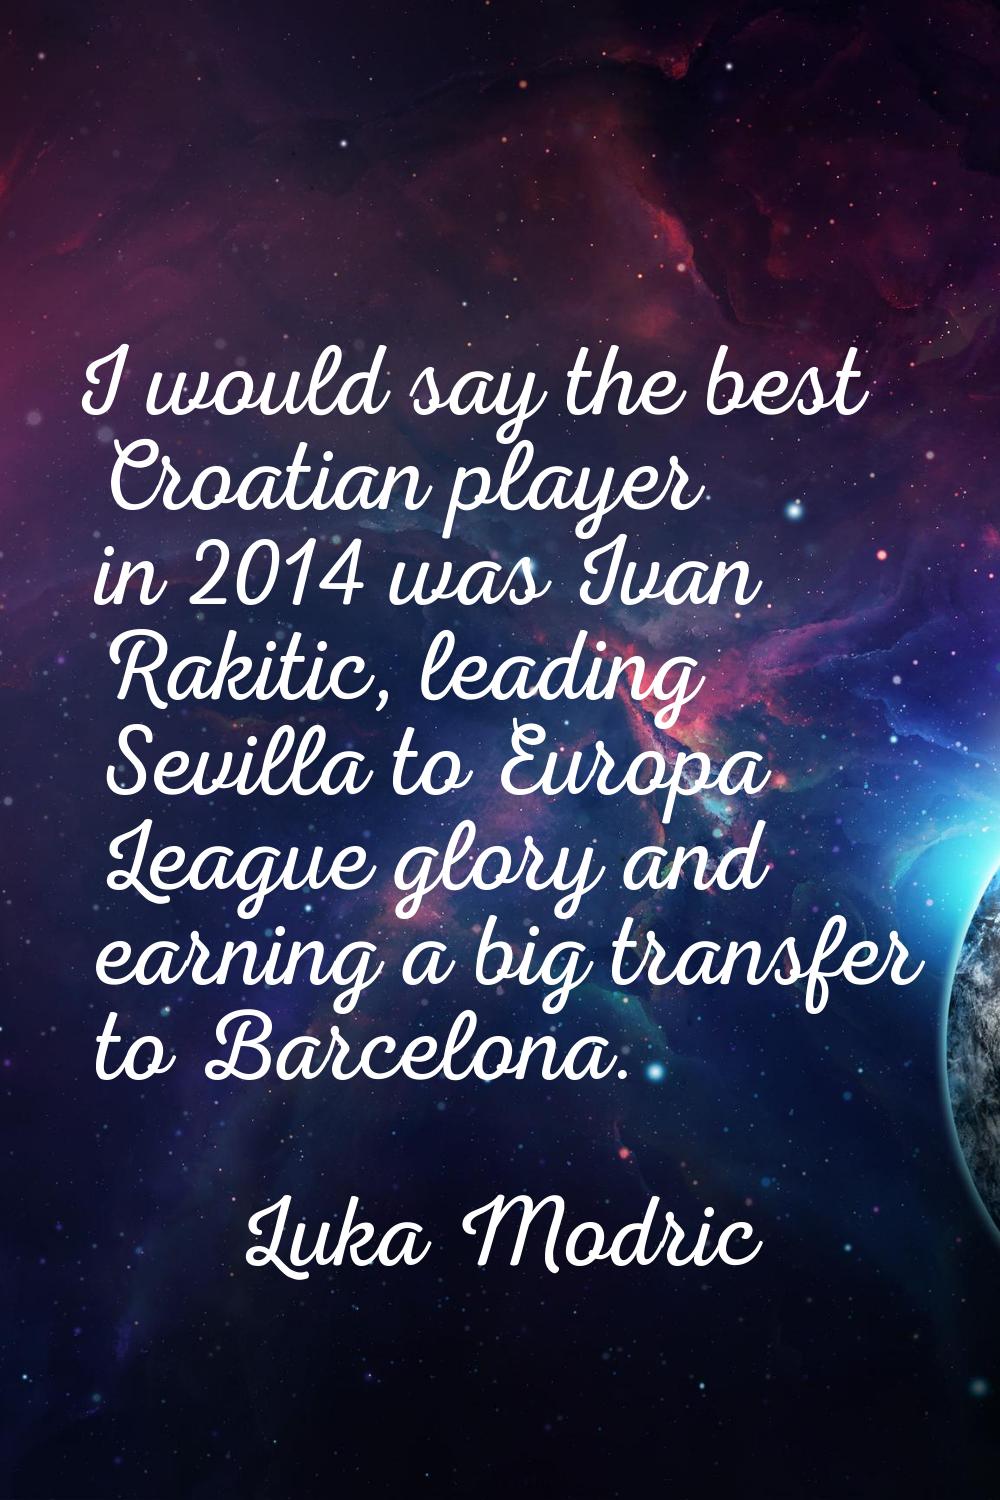 I would say the best Croatian player in 2014 was Ivan Rakitic, leading Sevilla to Europa League glo